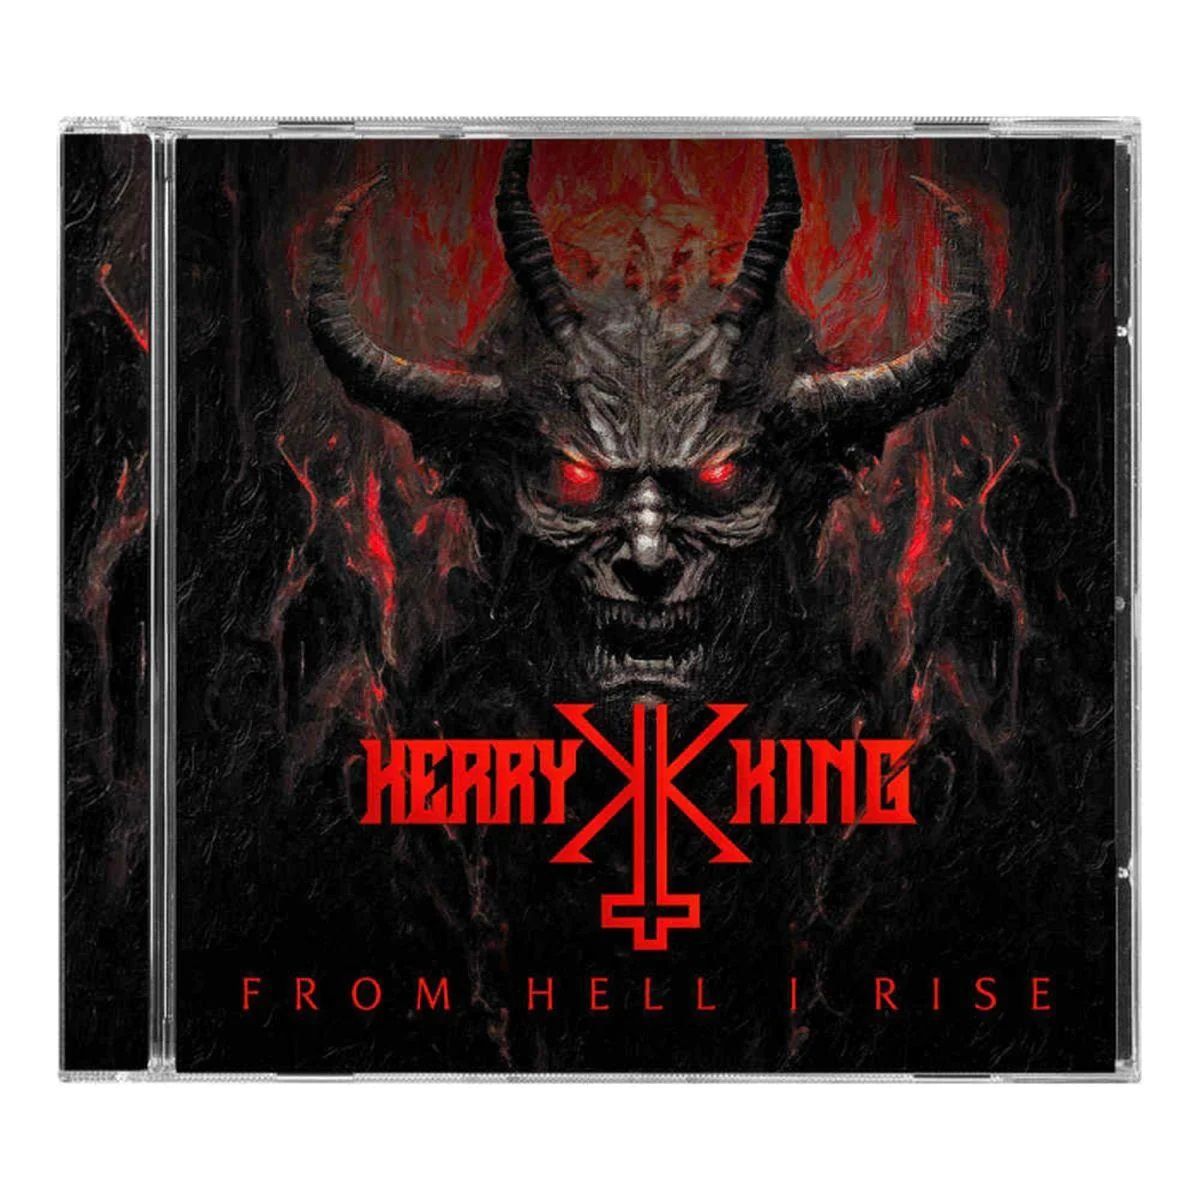 King, Kerry - From Hell I Rise - CD - New